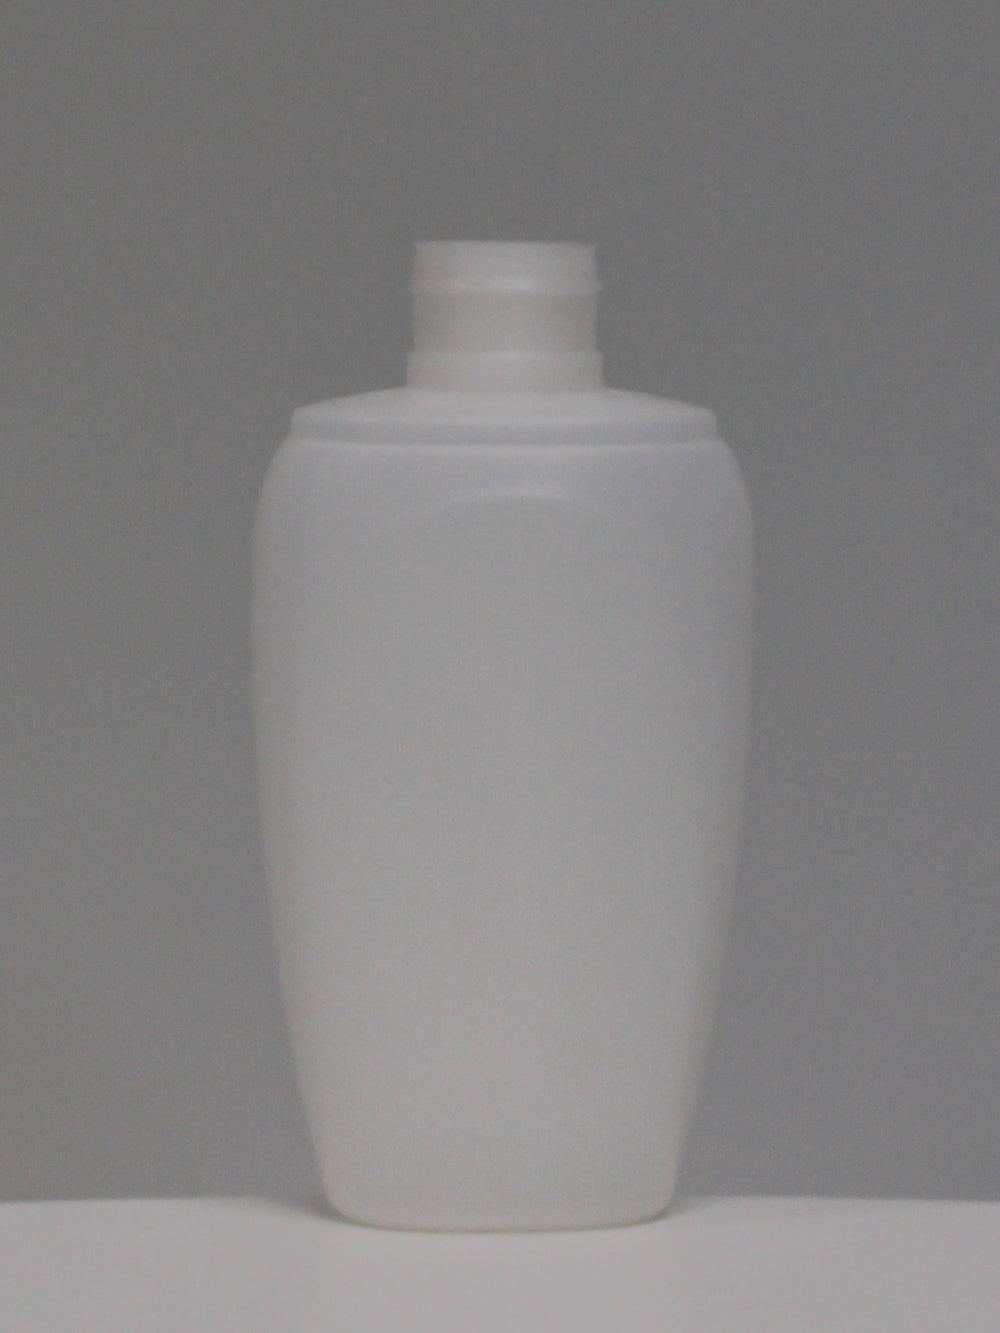 150ml LUX Oval Lotion Bottle - (Box of 100 units)